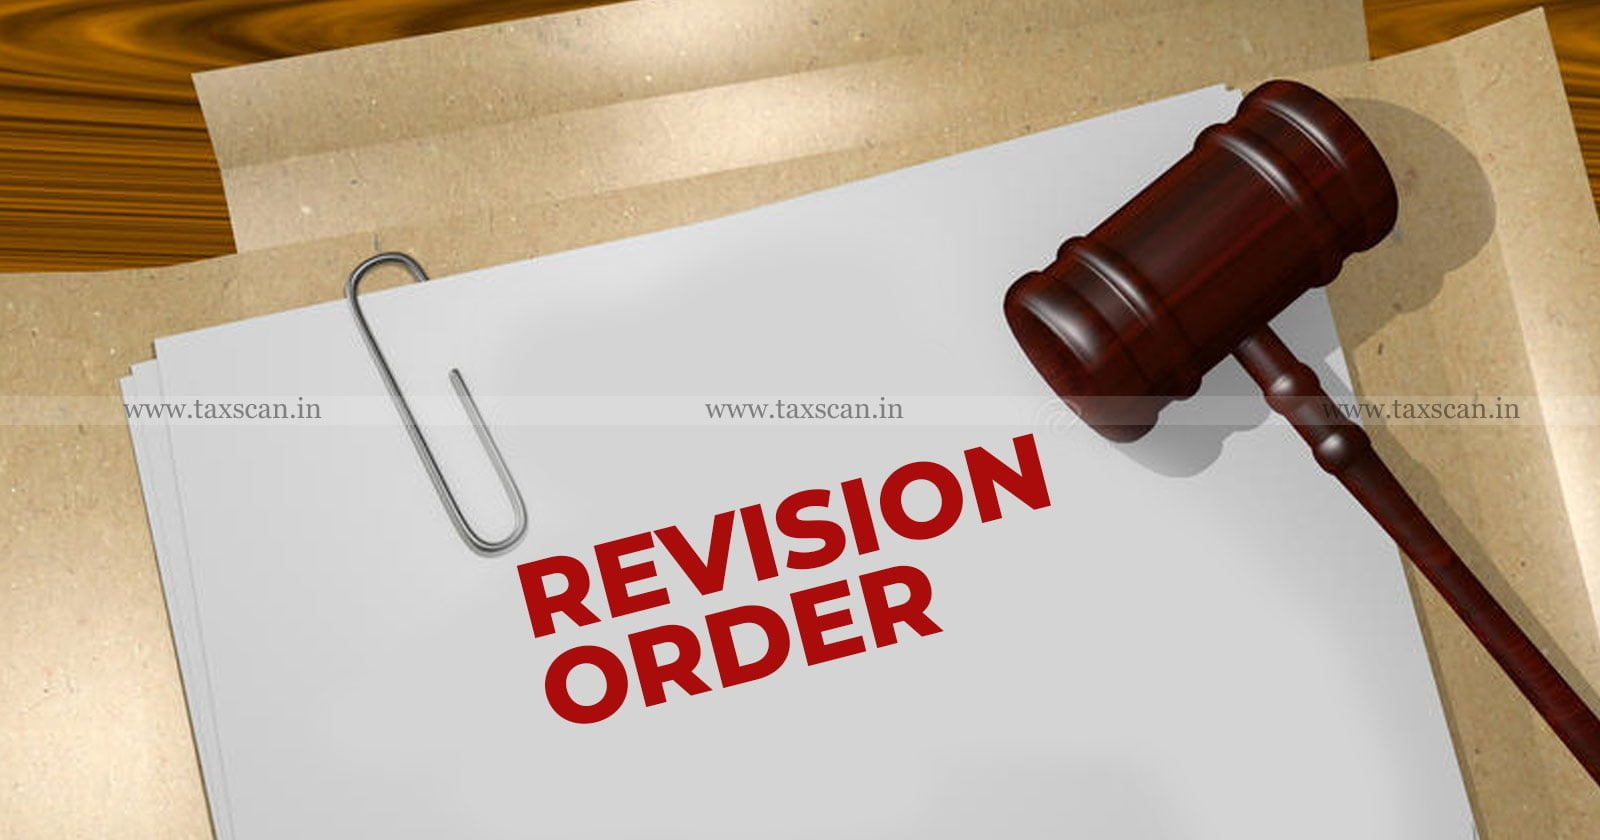 ITAT quashes Revision Order - Natural Justice Principle - Fixed Assets - Revision Order - ITAT - Income Tax Act - Income Tax - TAXSCAN